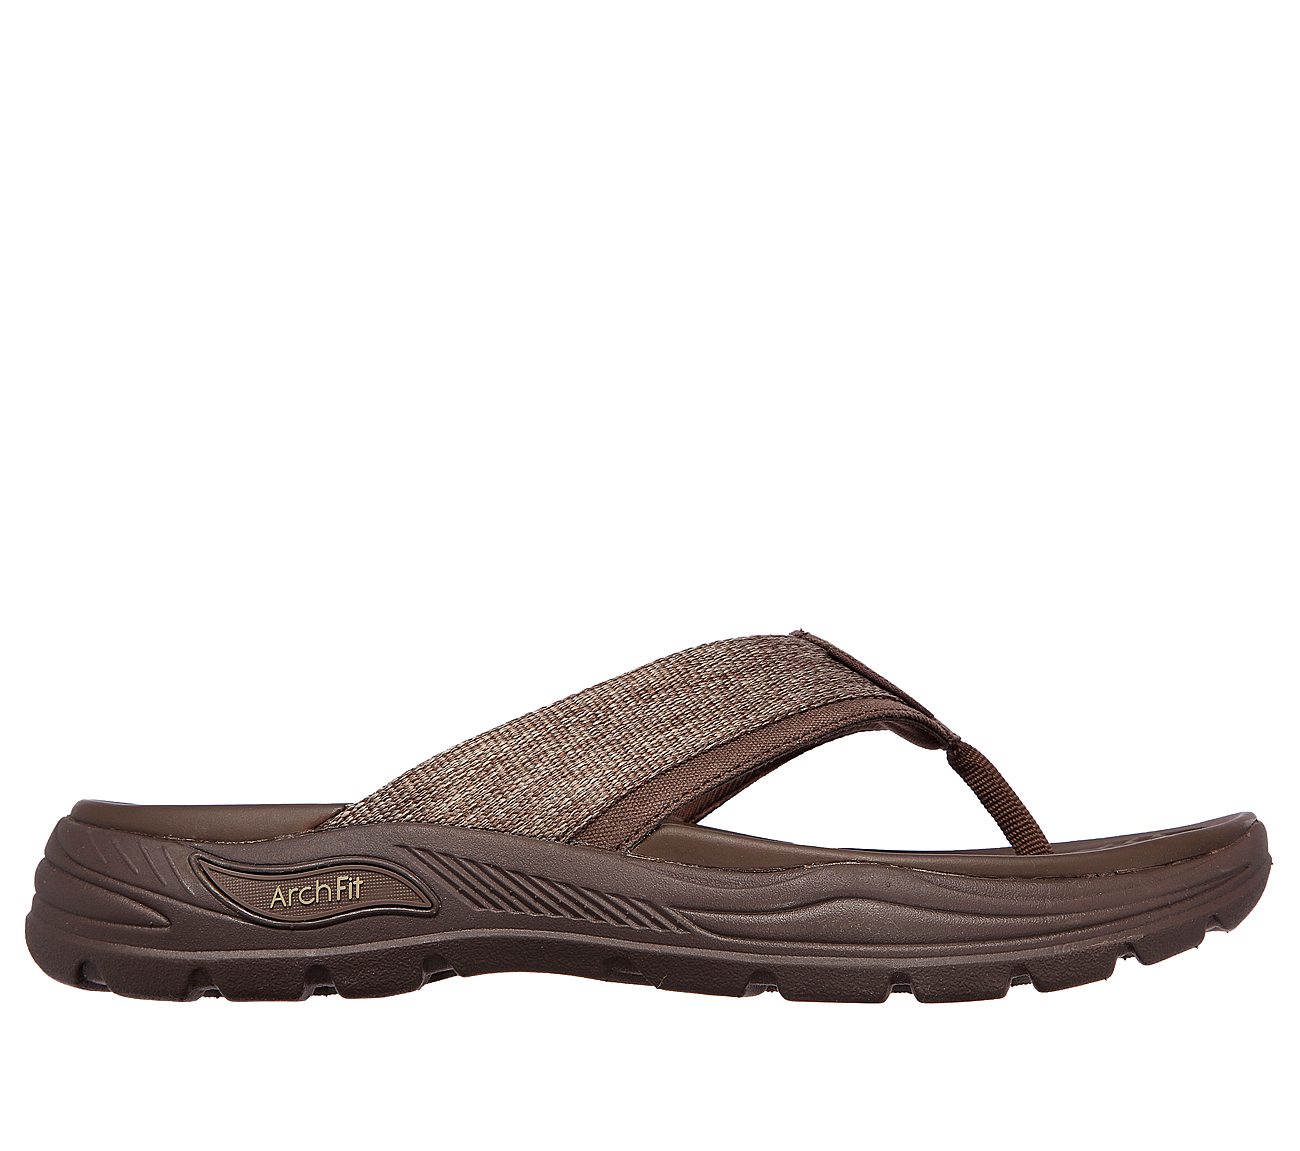 ARCH FIT MOTLEY SD - DOLANO, CCHOCOLATE Footwear Lateral View